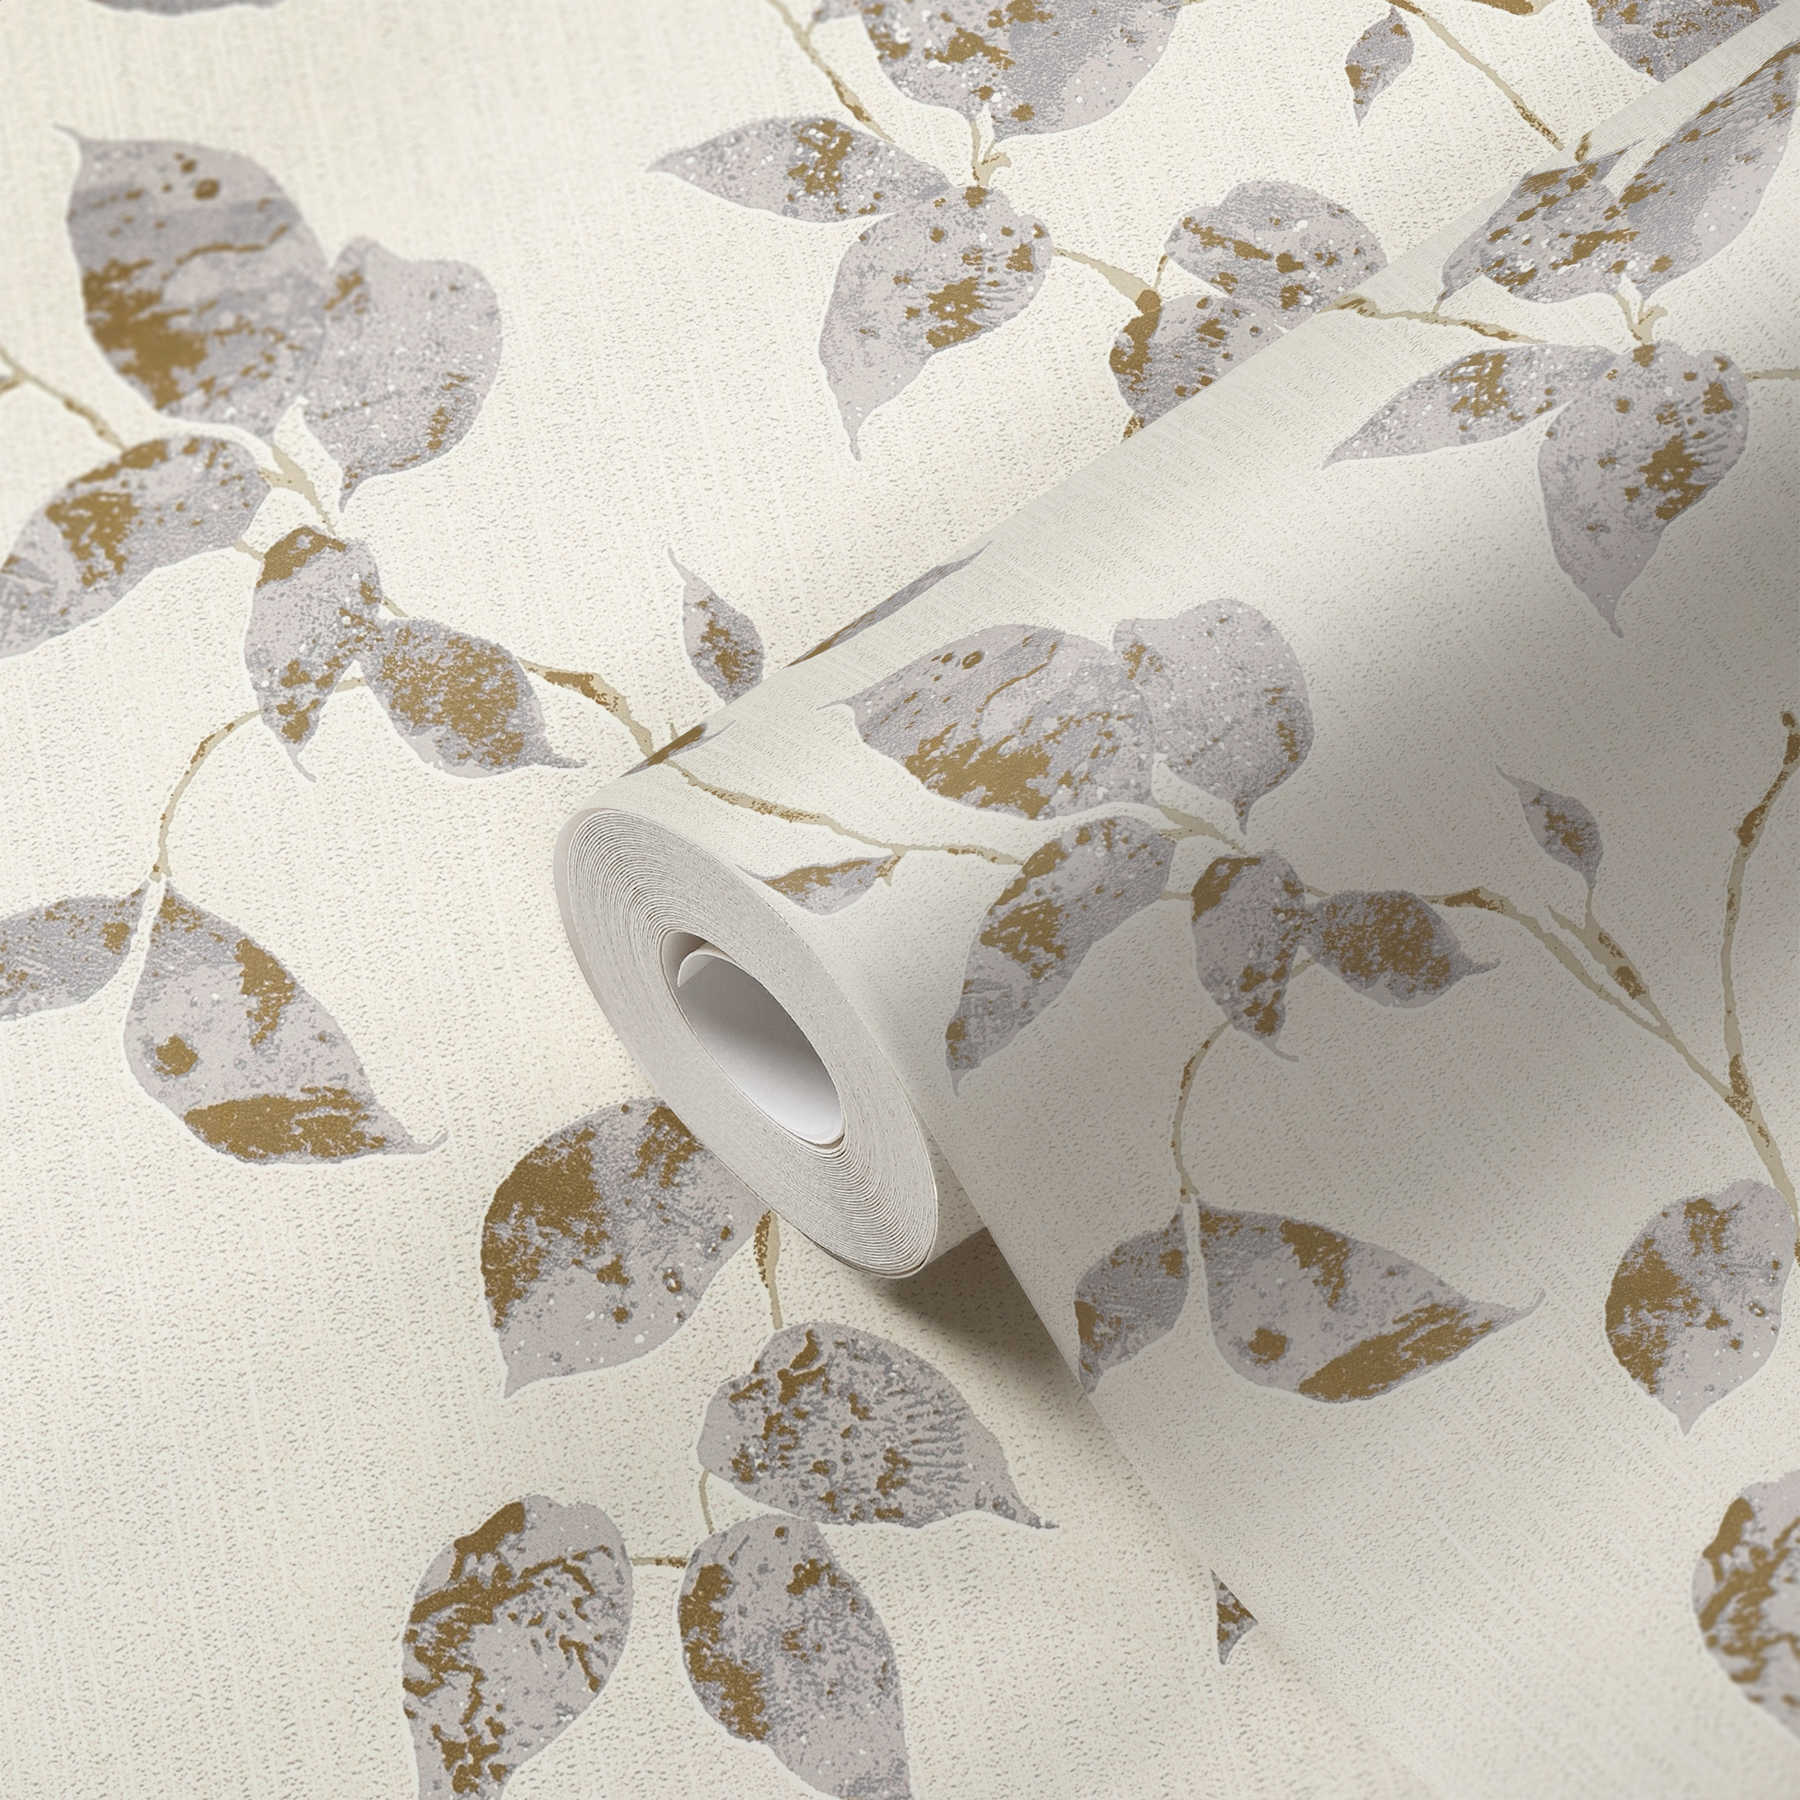             Textured Wallpaper with Leaf Tendrils & Metallic Accent - Grey, White
        